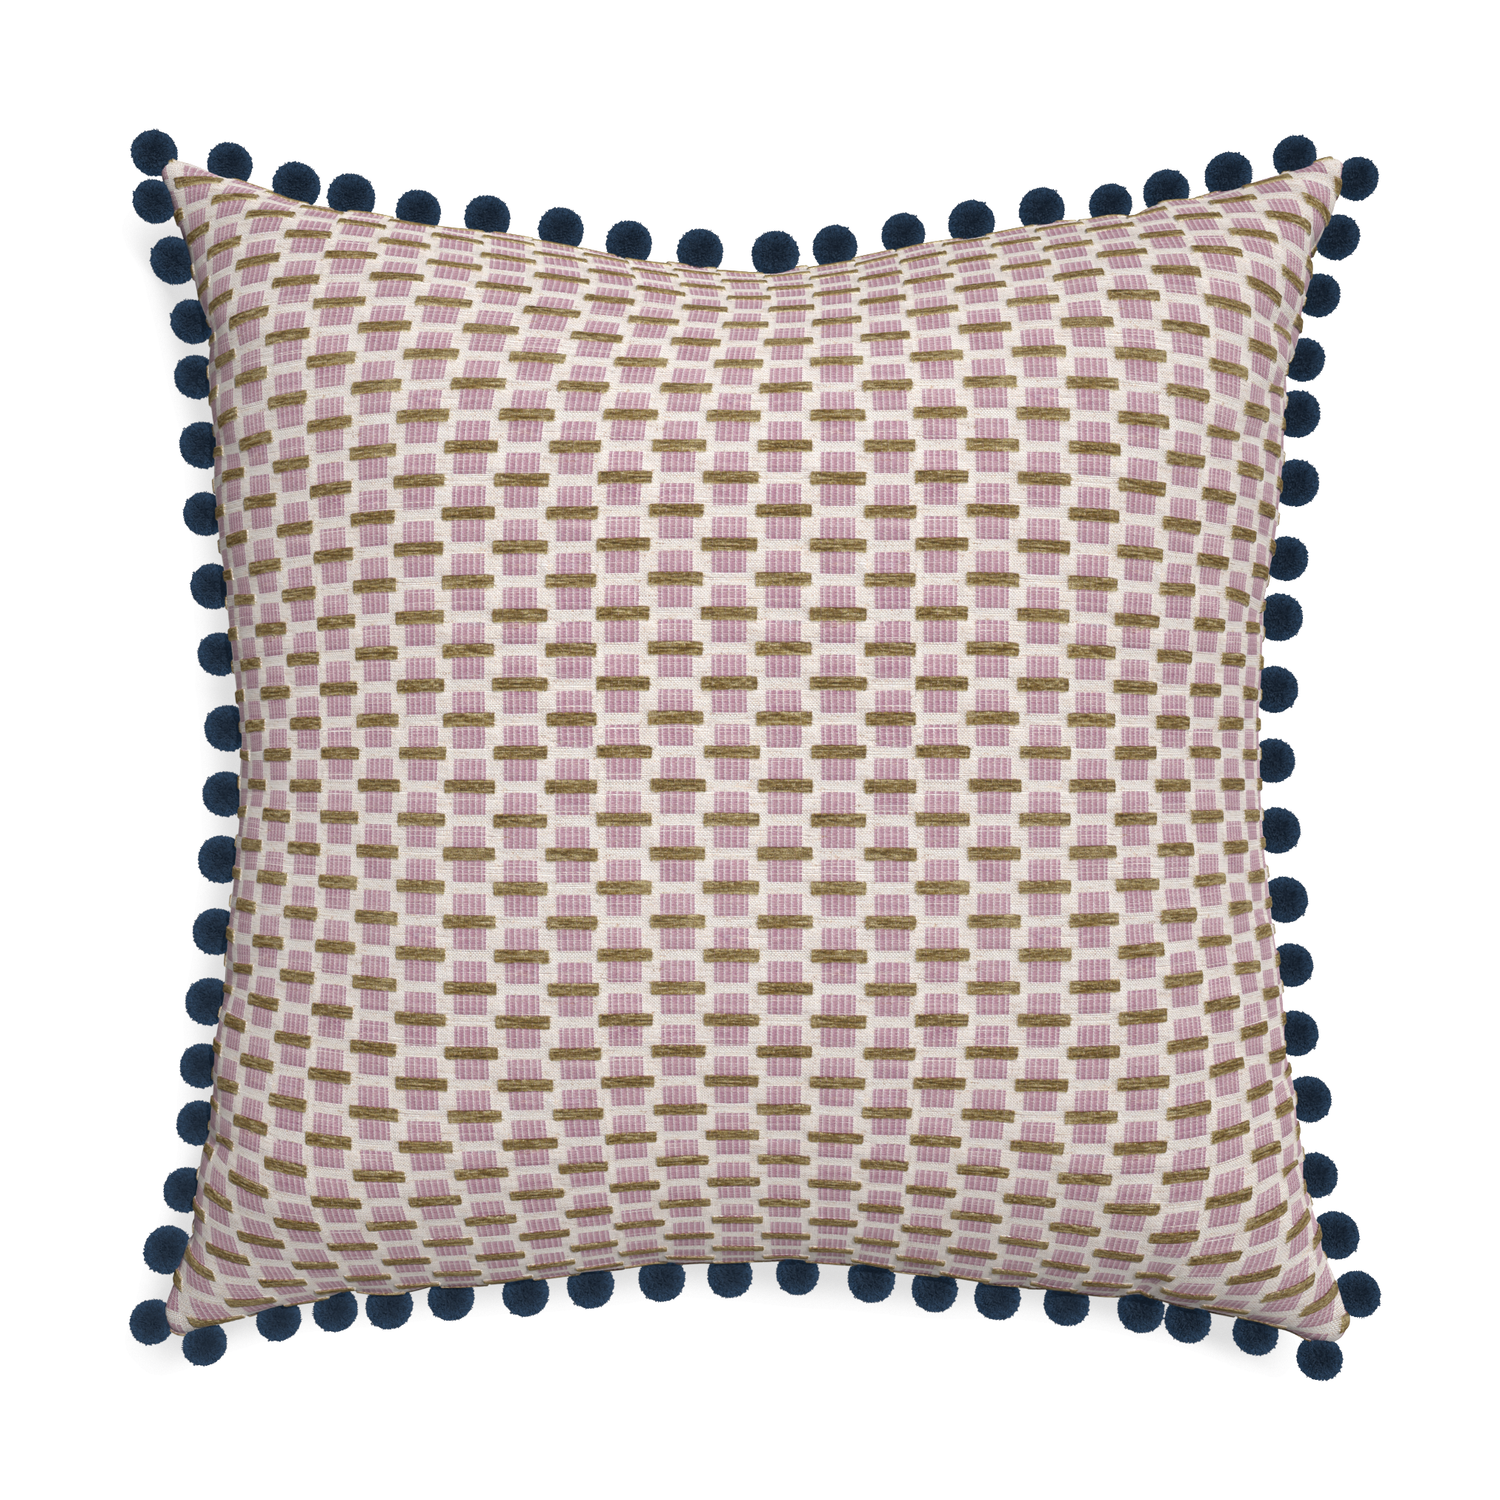 Euro-sham willow orchid custom pink geometric chenillepillow with c on white background